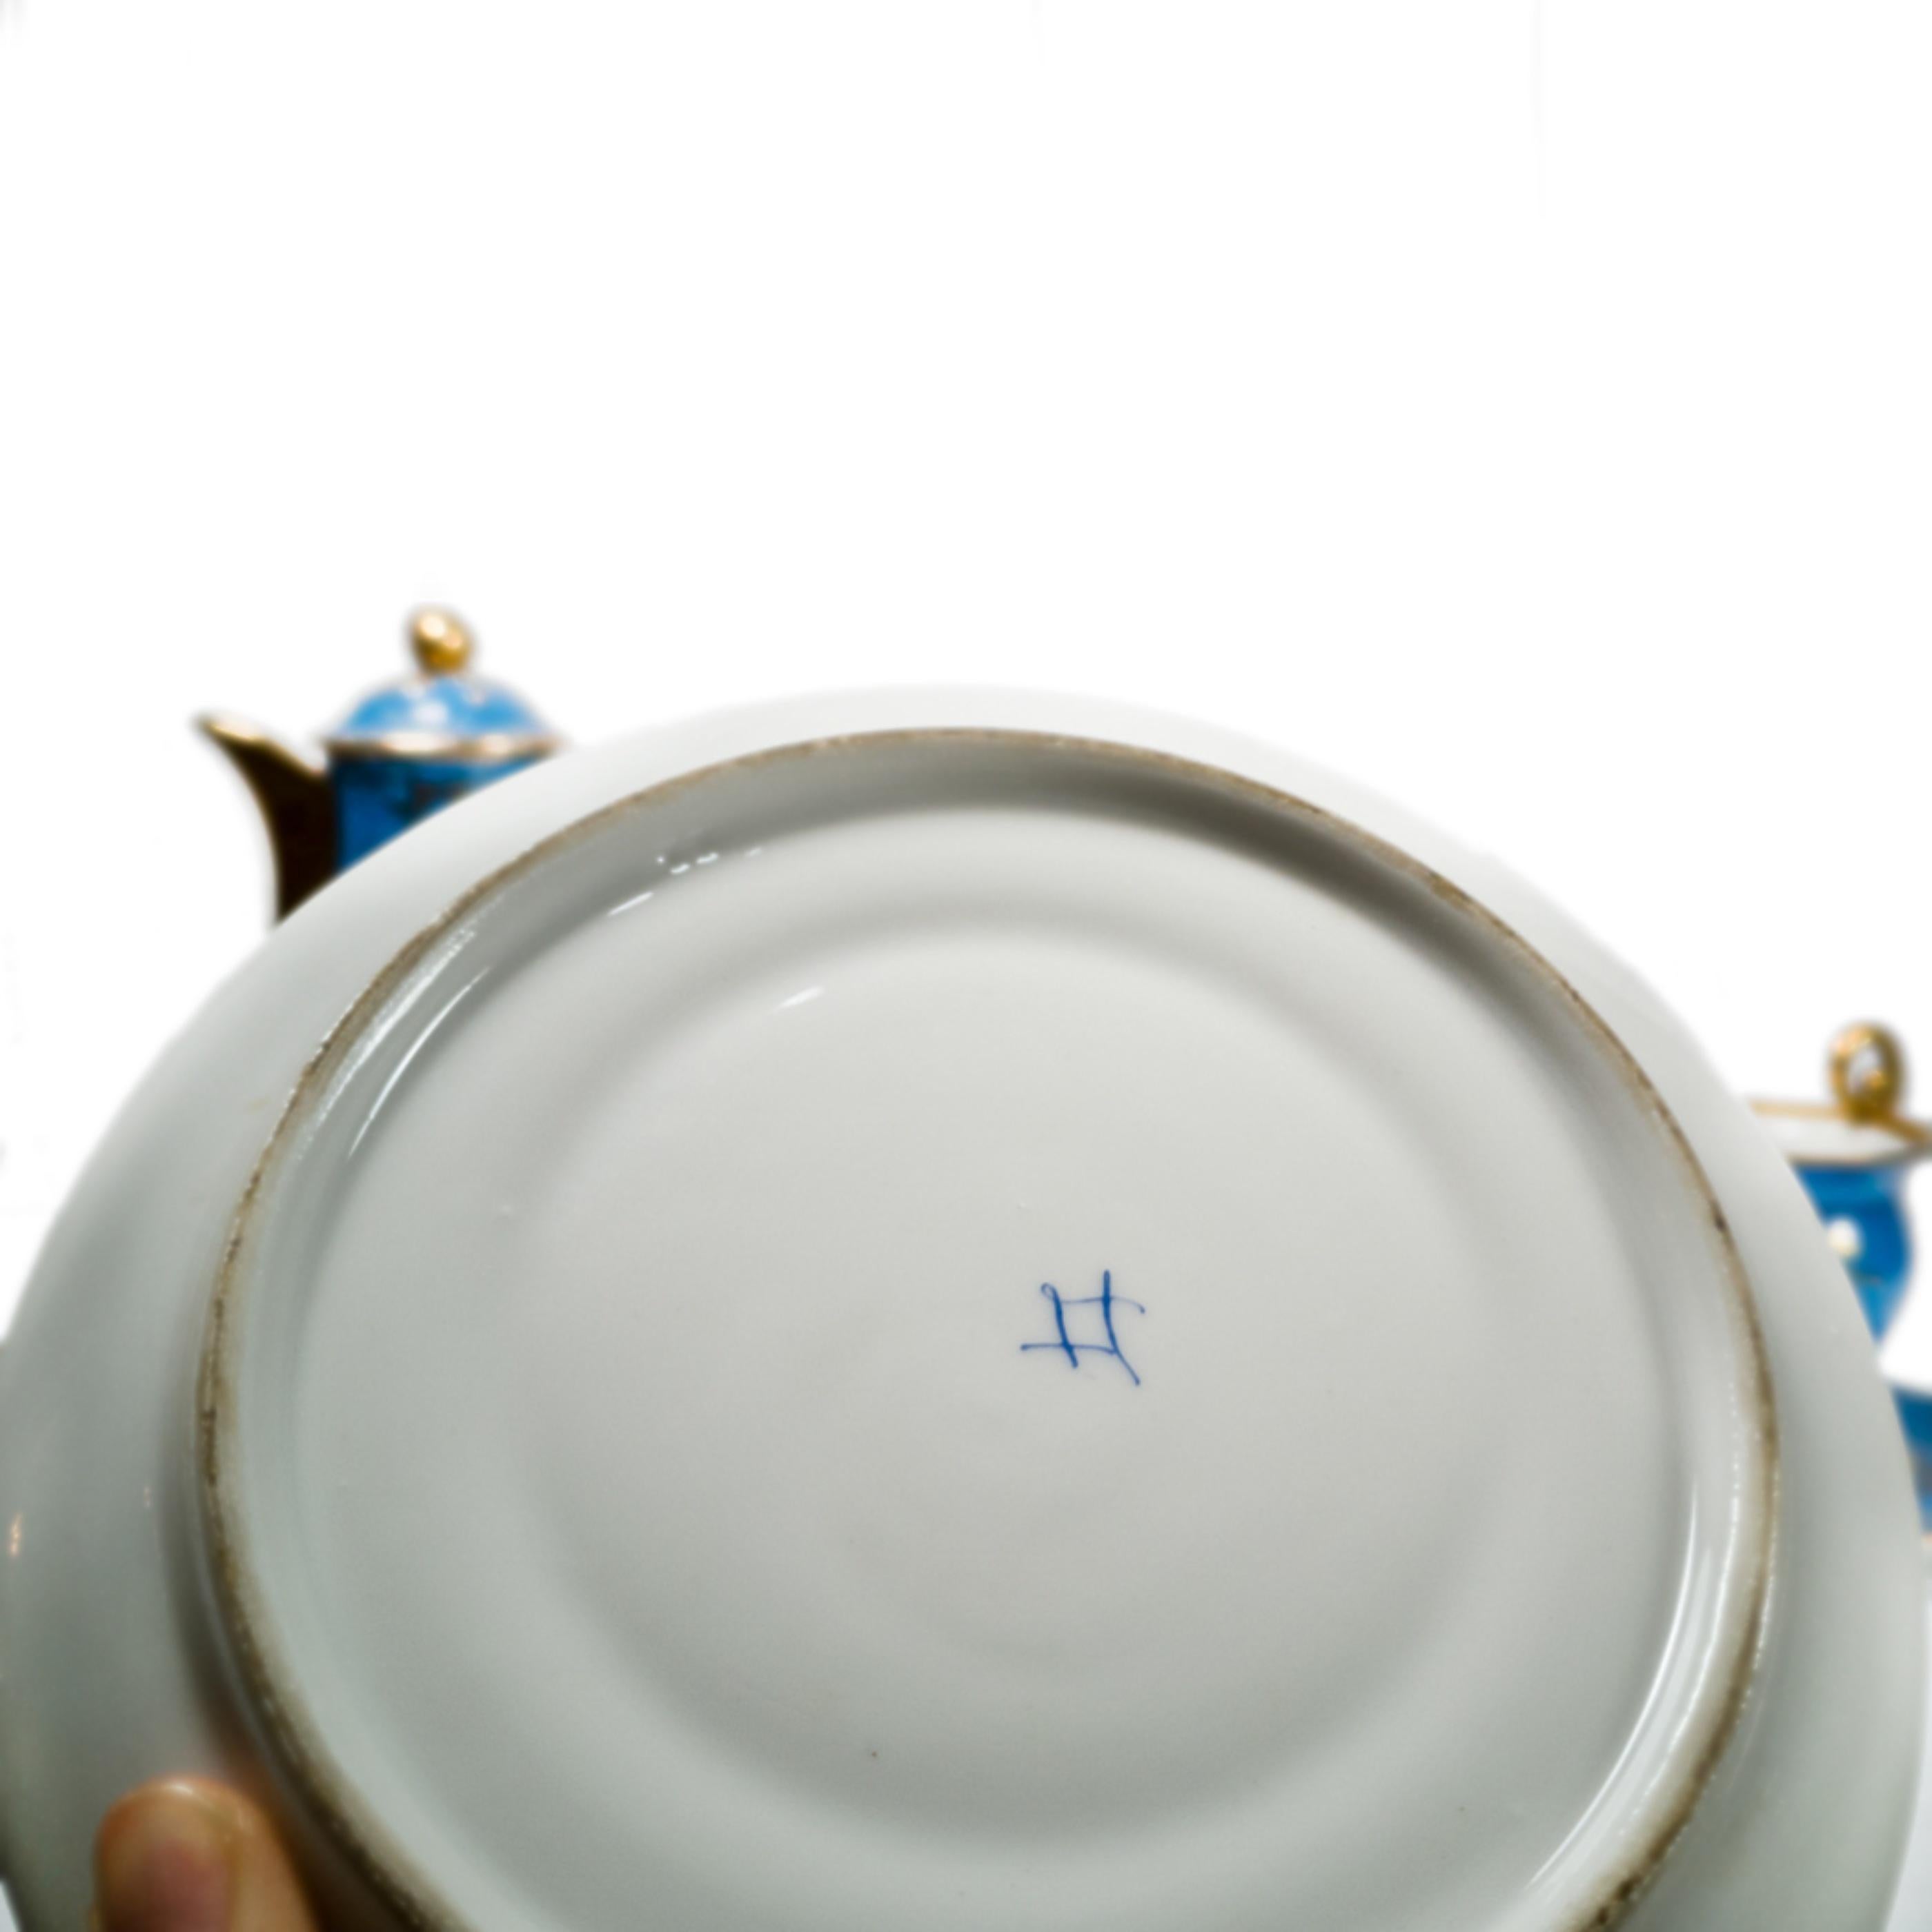 A set of exquisite blue and gold porcelain teaware, crafted in the esteemed Sèvres porcelain factory, mdel from 1764. The set includes a teapot and two cups and saucers, each piece adorned with intricate plant motifs and gold embellishments. The set